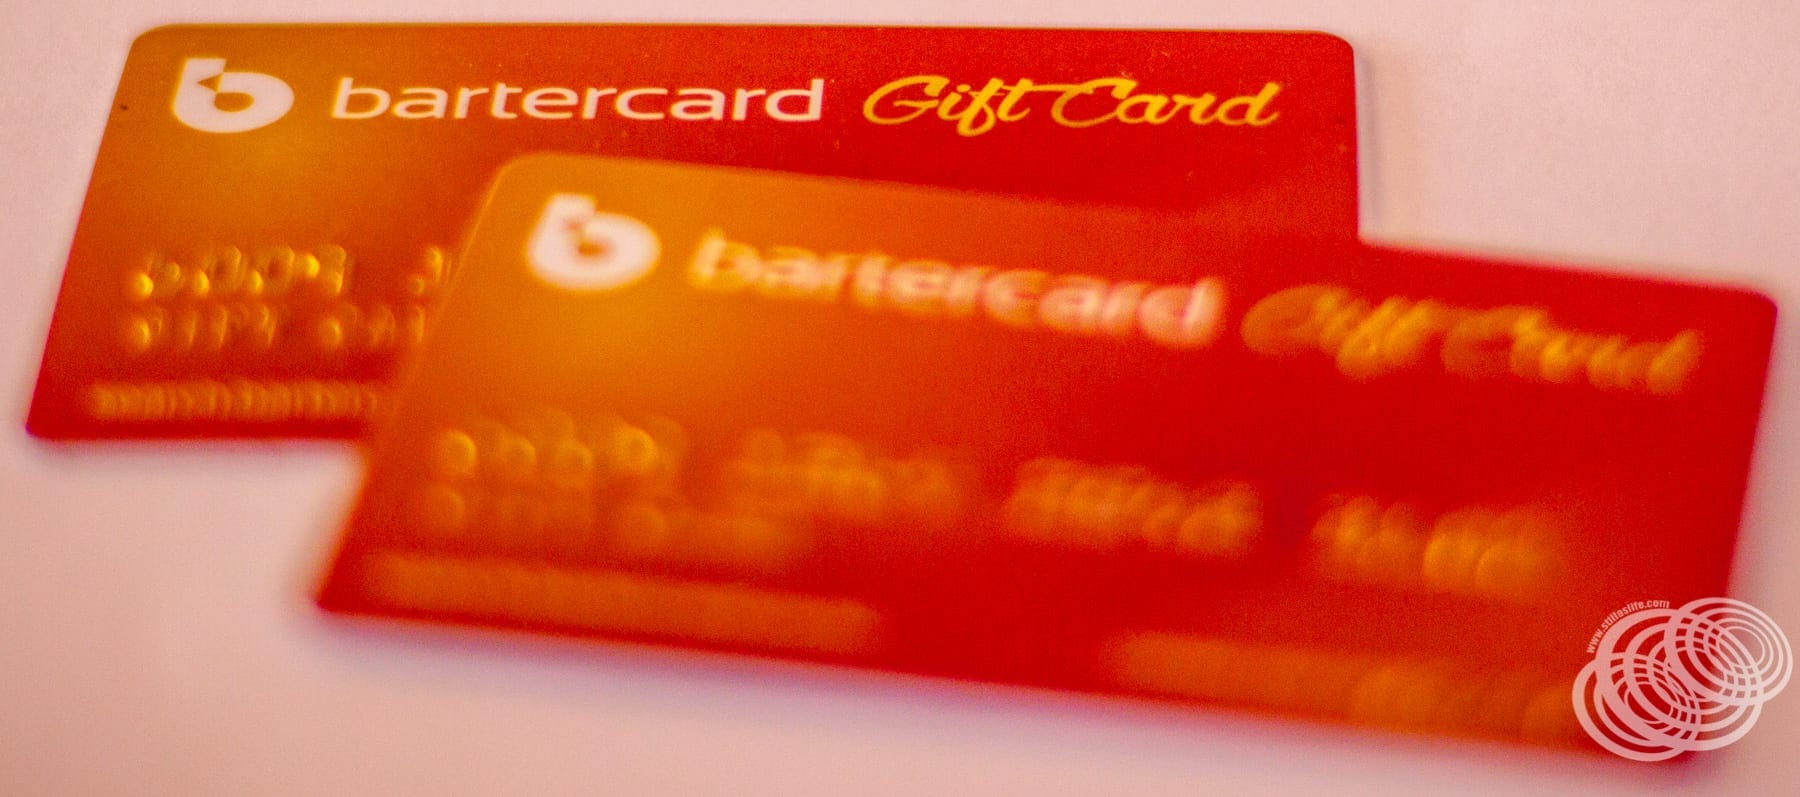 New Zealand Bartercard Gift Cards